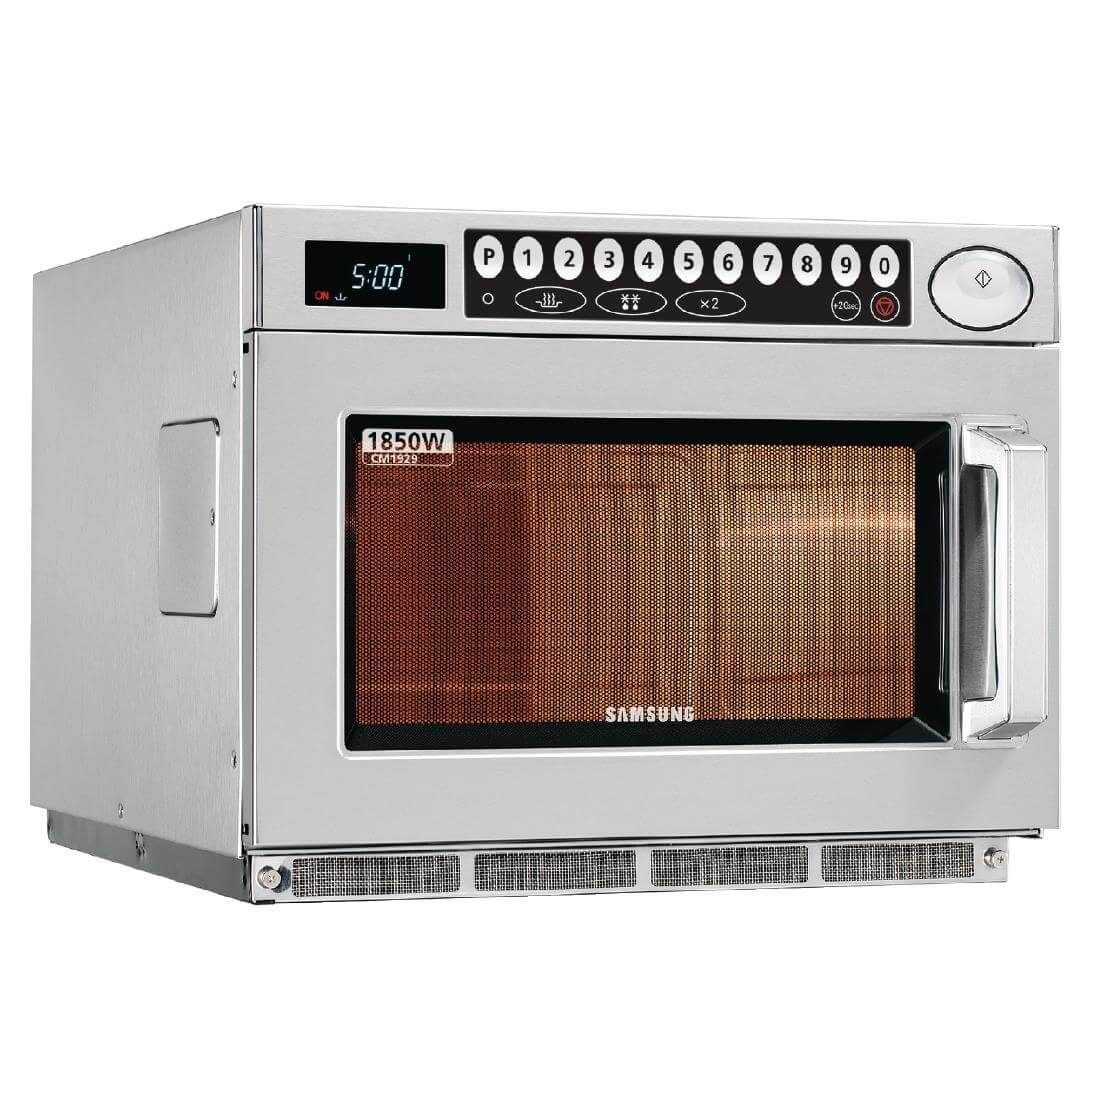 1500W Samsung Commercial Microwave Oven – CM1529XEU